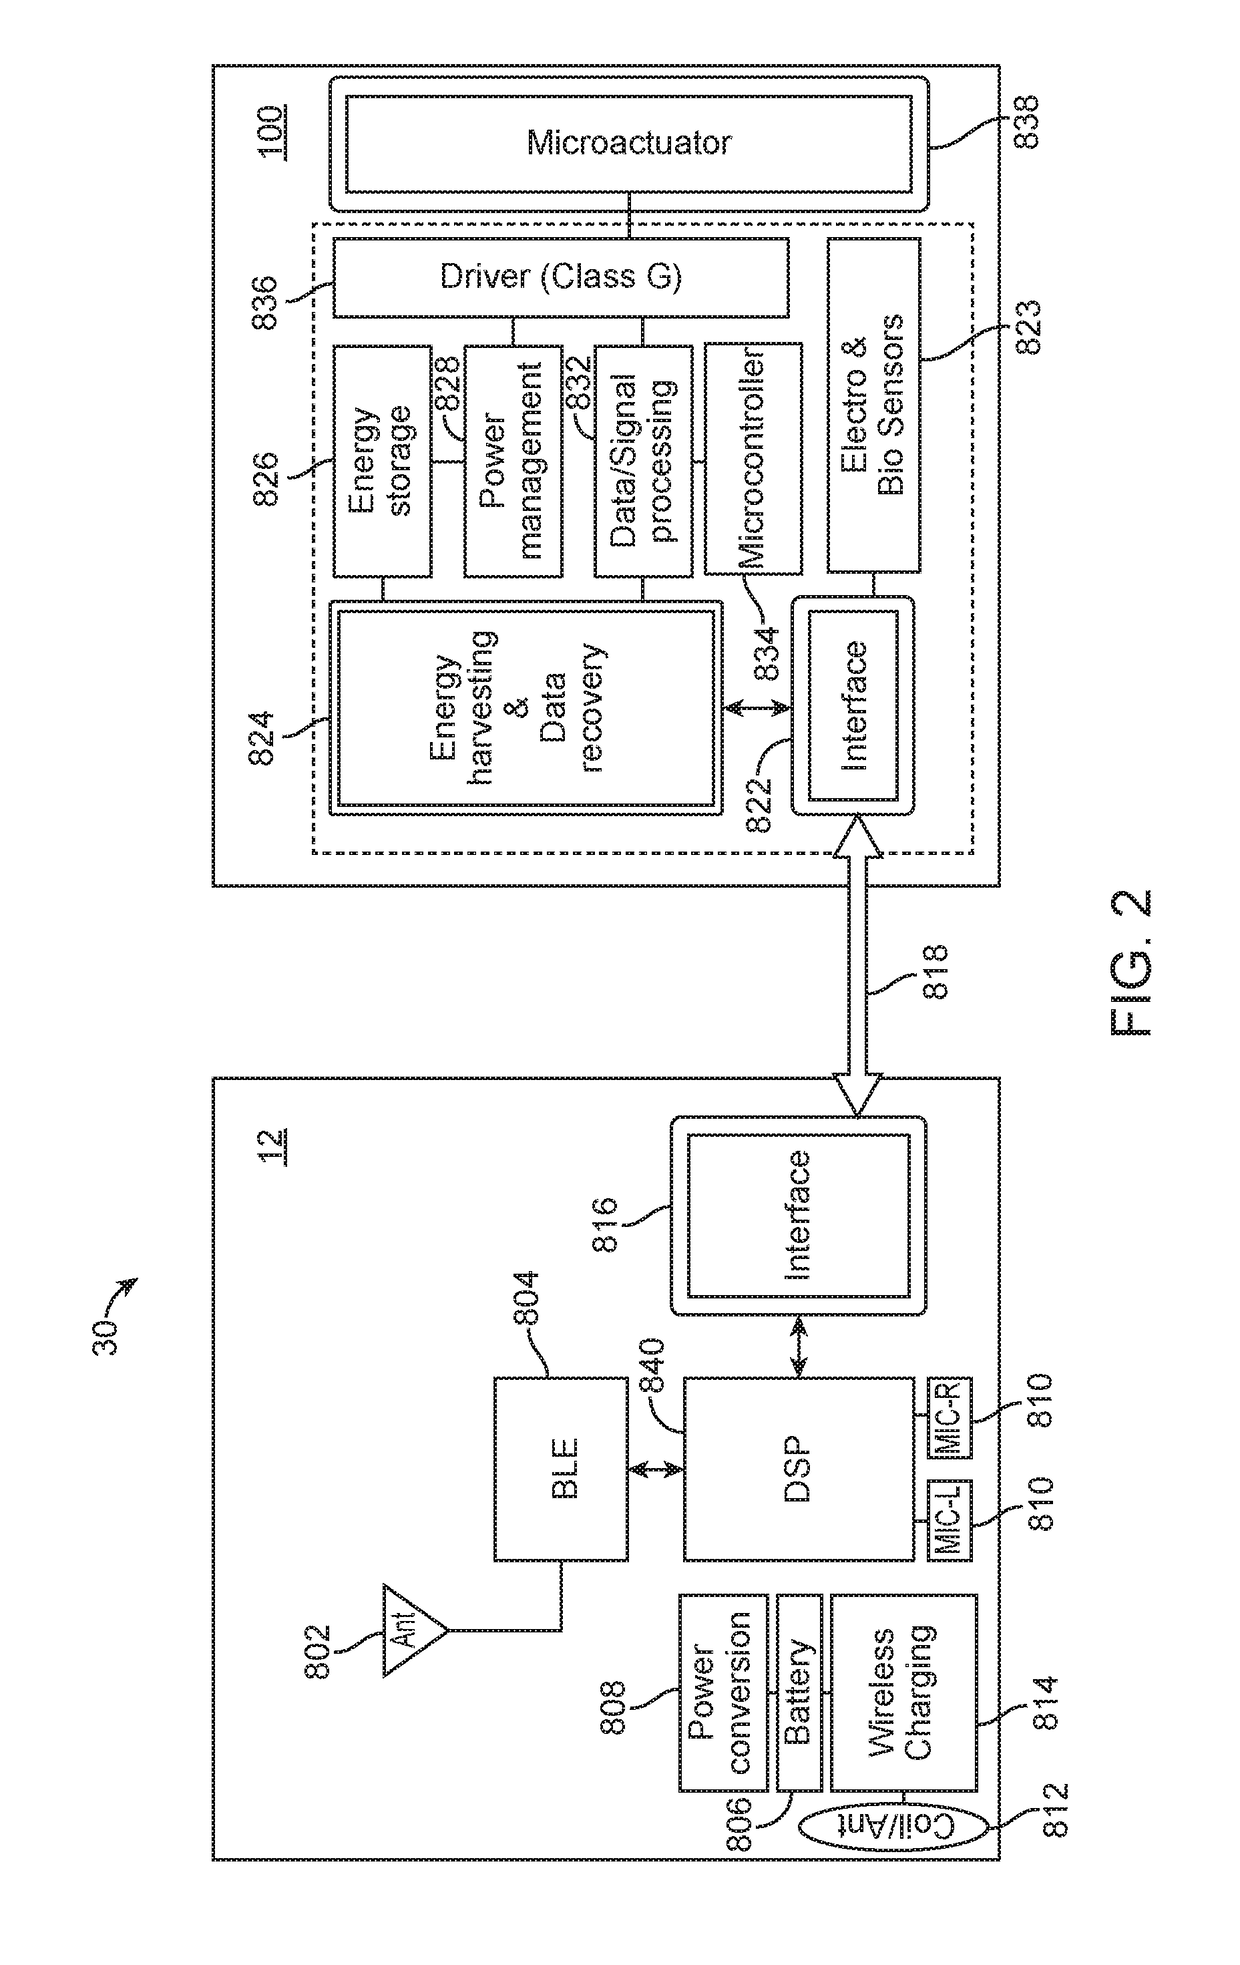 Contact hearing systems, apparatus and methods